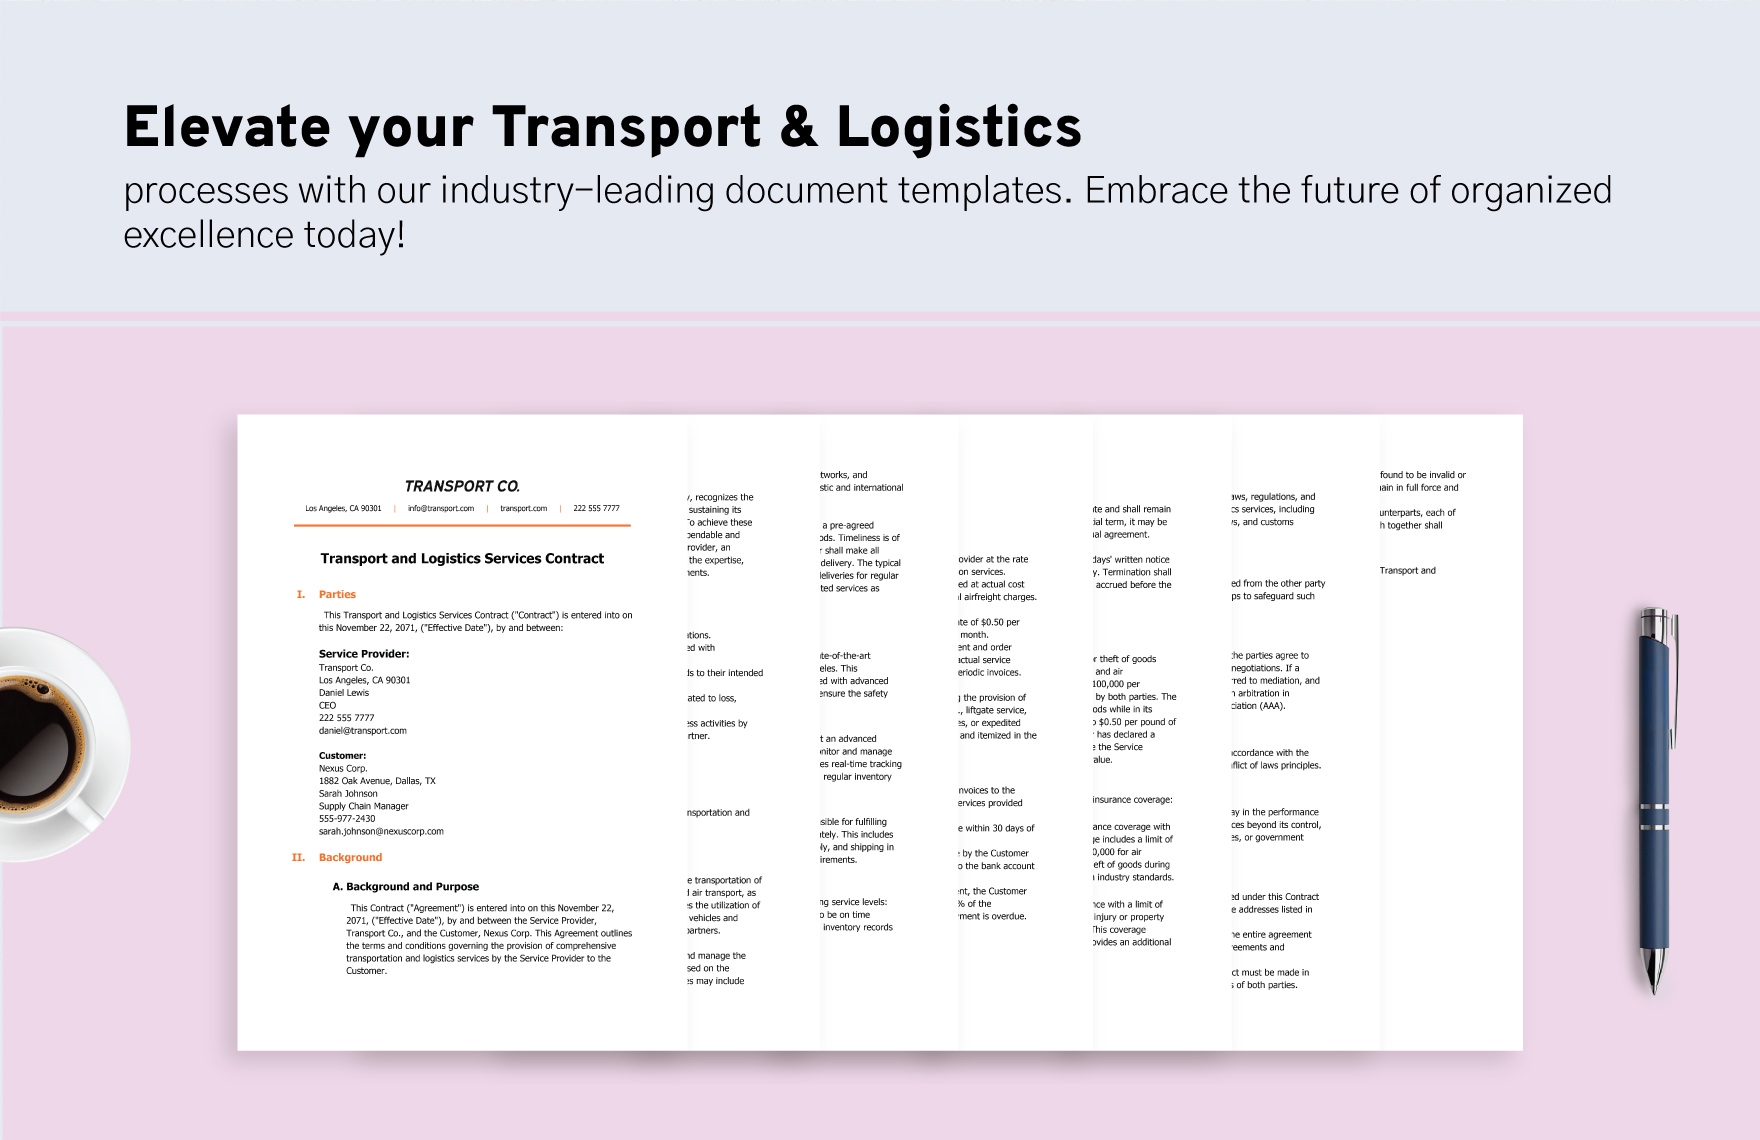 Transport and Logistics Services Contract Template